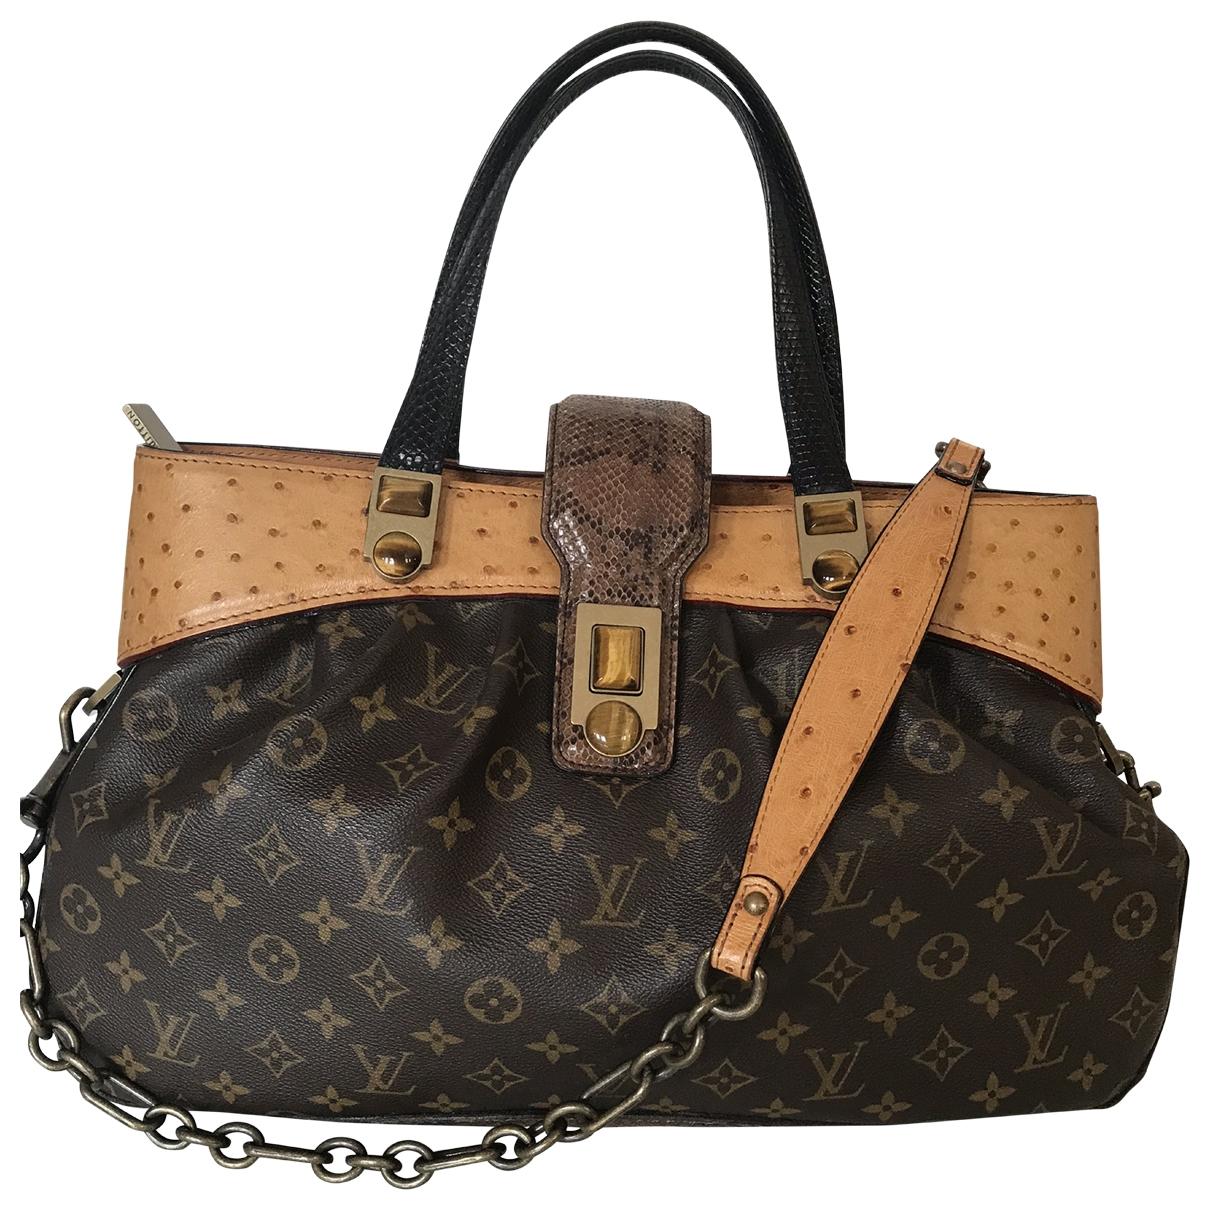 Used Purses Louis Vuitton  Natural Resource Department